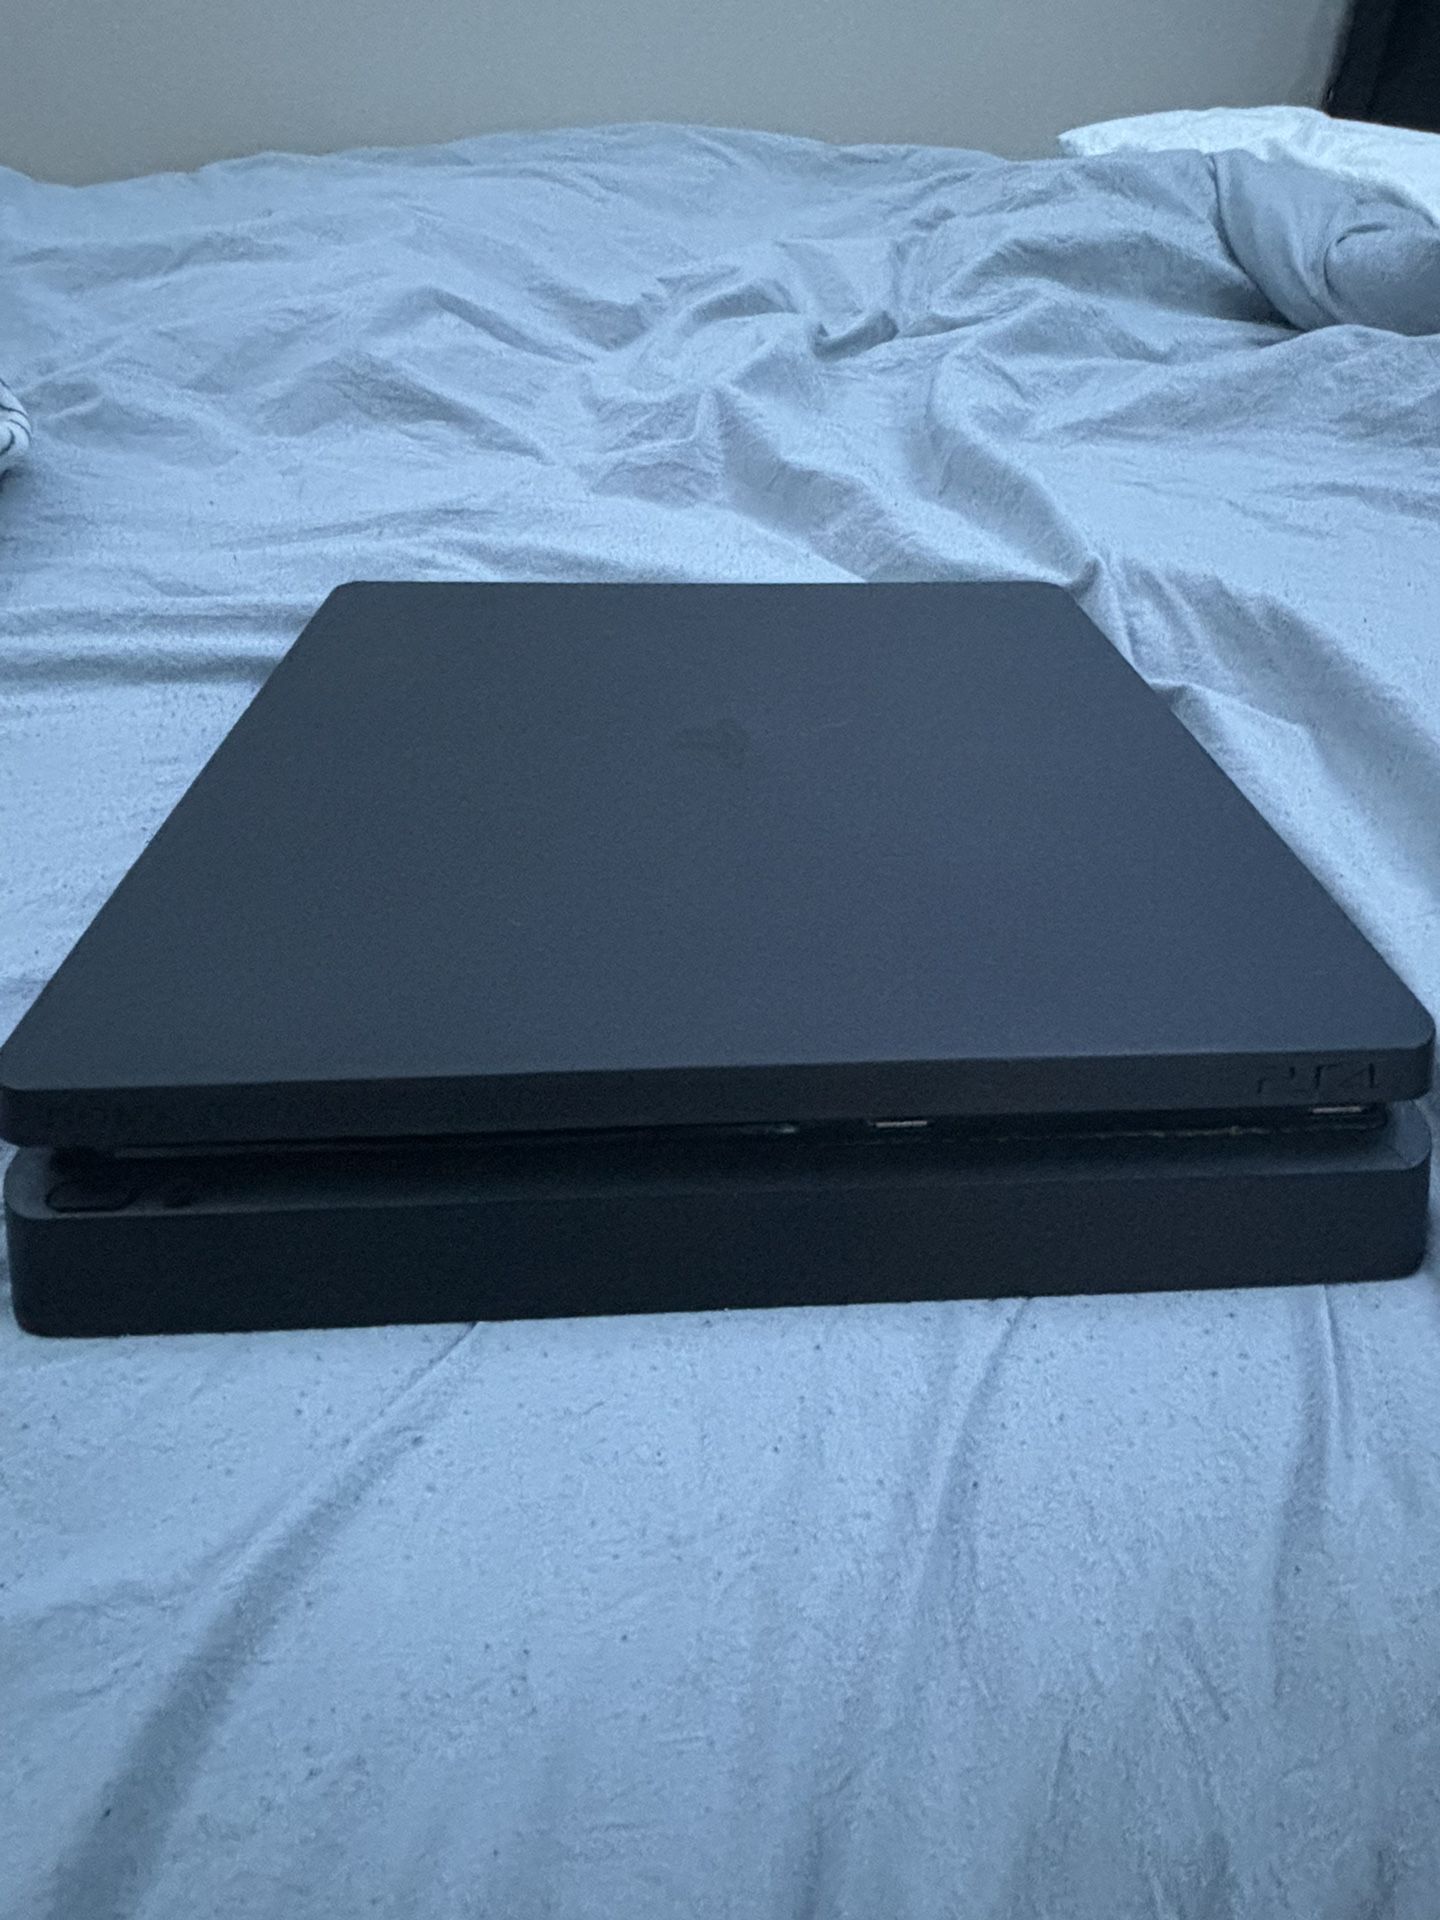 PS4 SLIM (comes with power and hdmi cord)